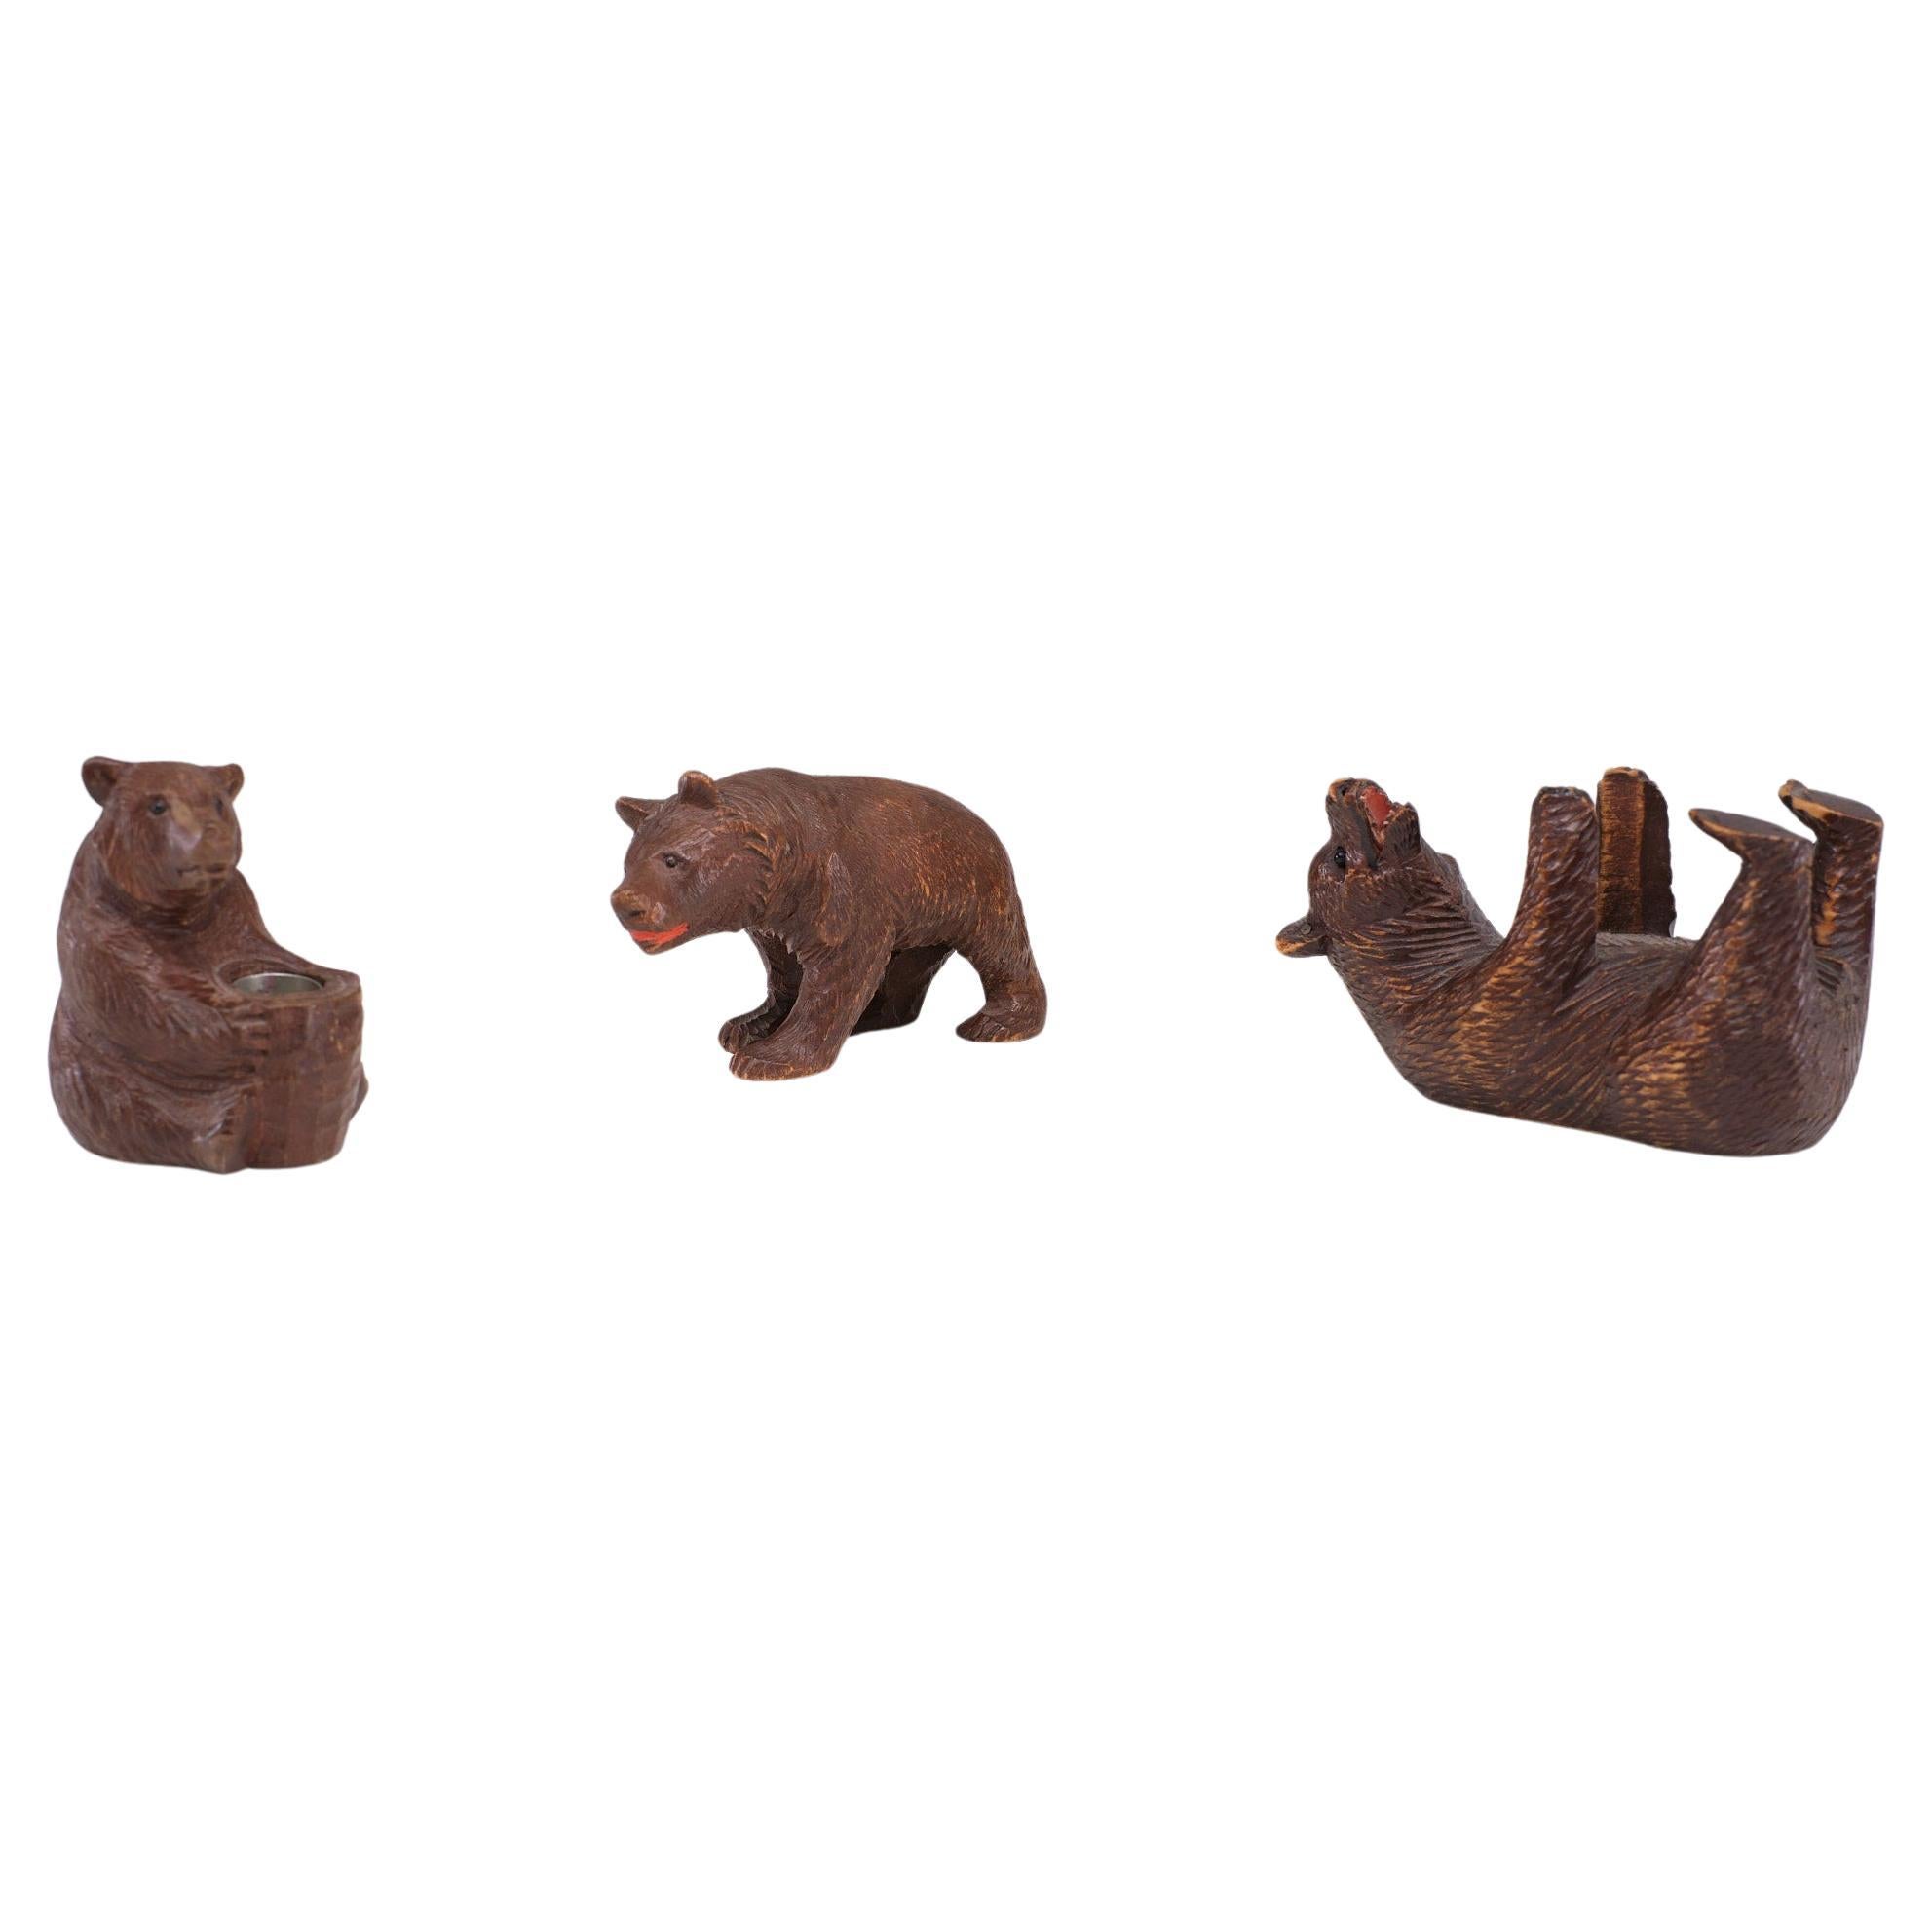 3 carved Black Forest miniature  Bears  1910s  Germany  For Sale